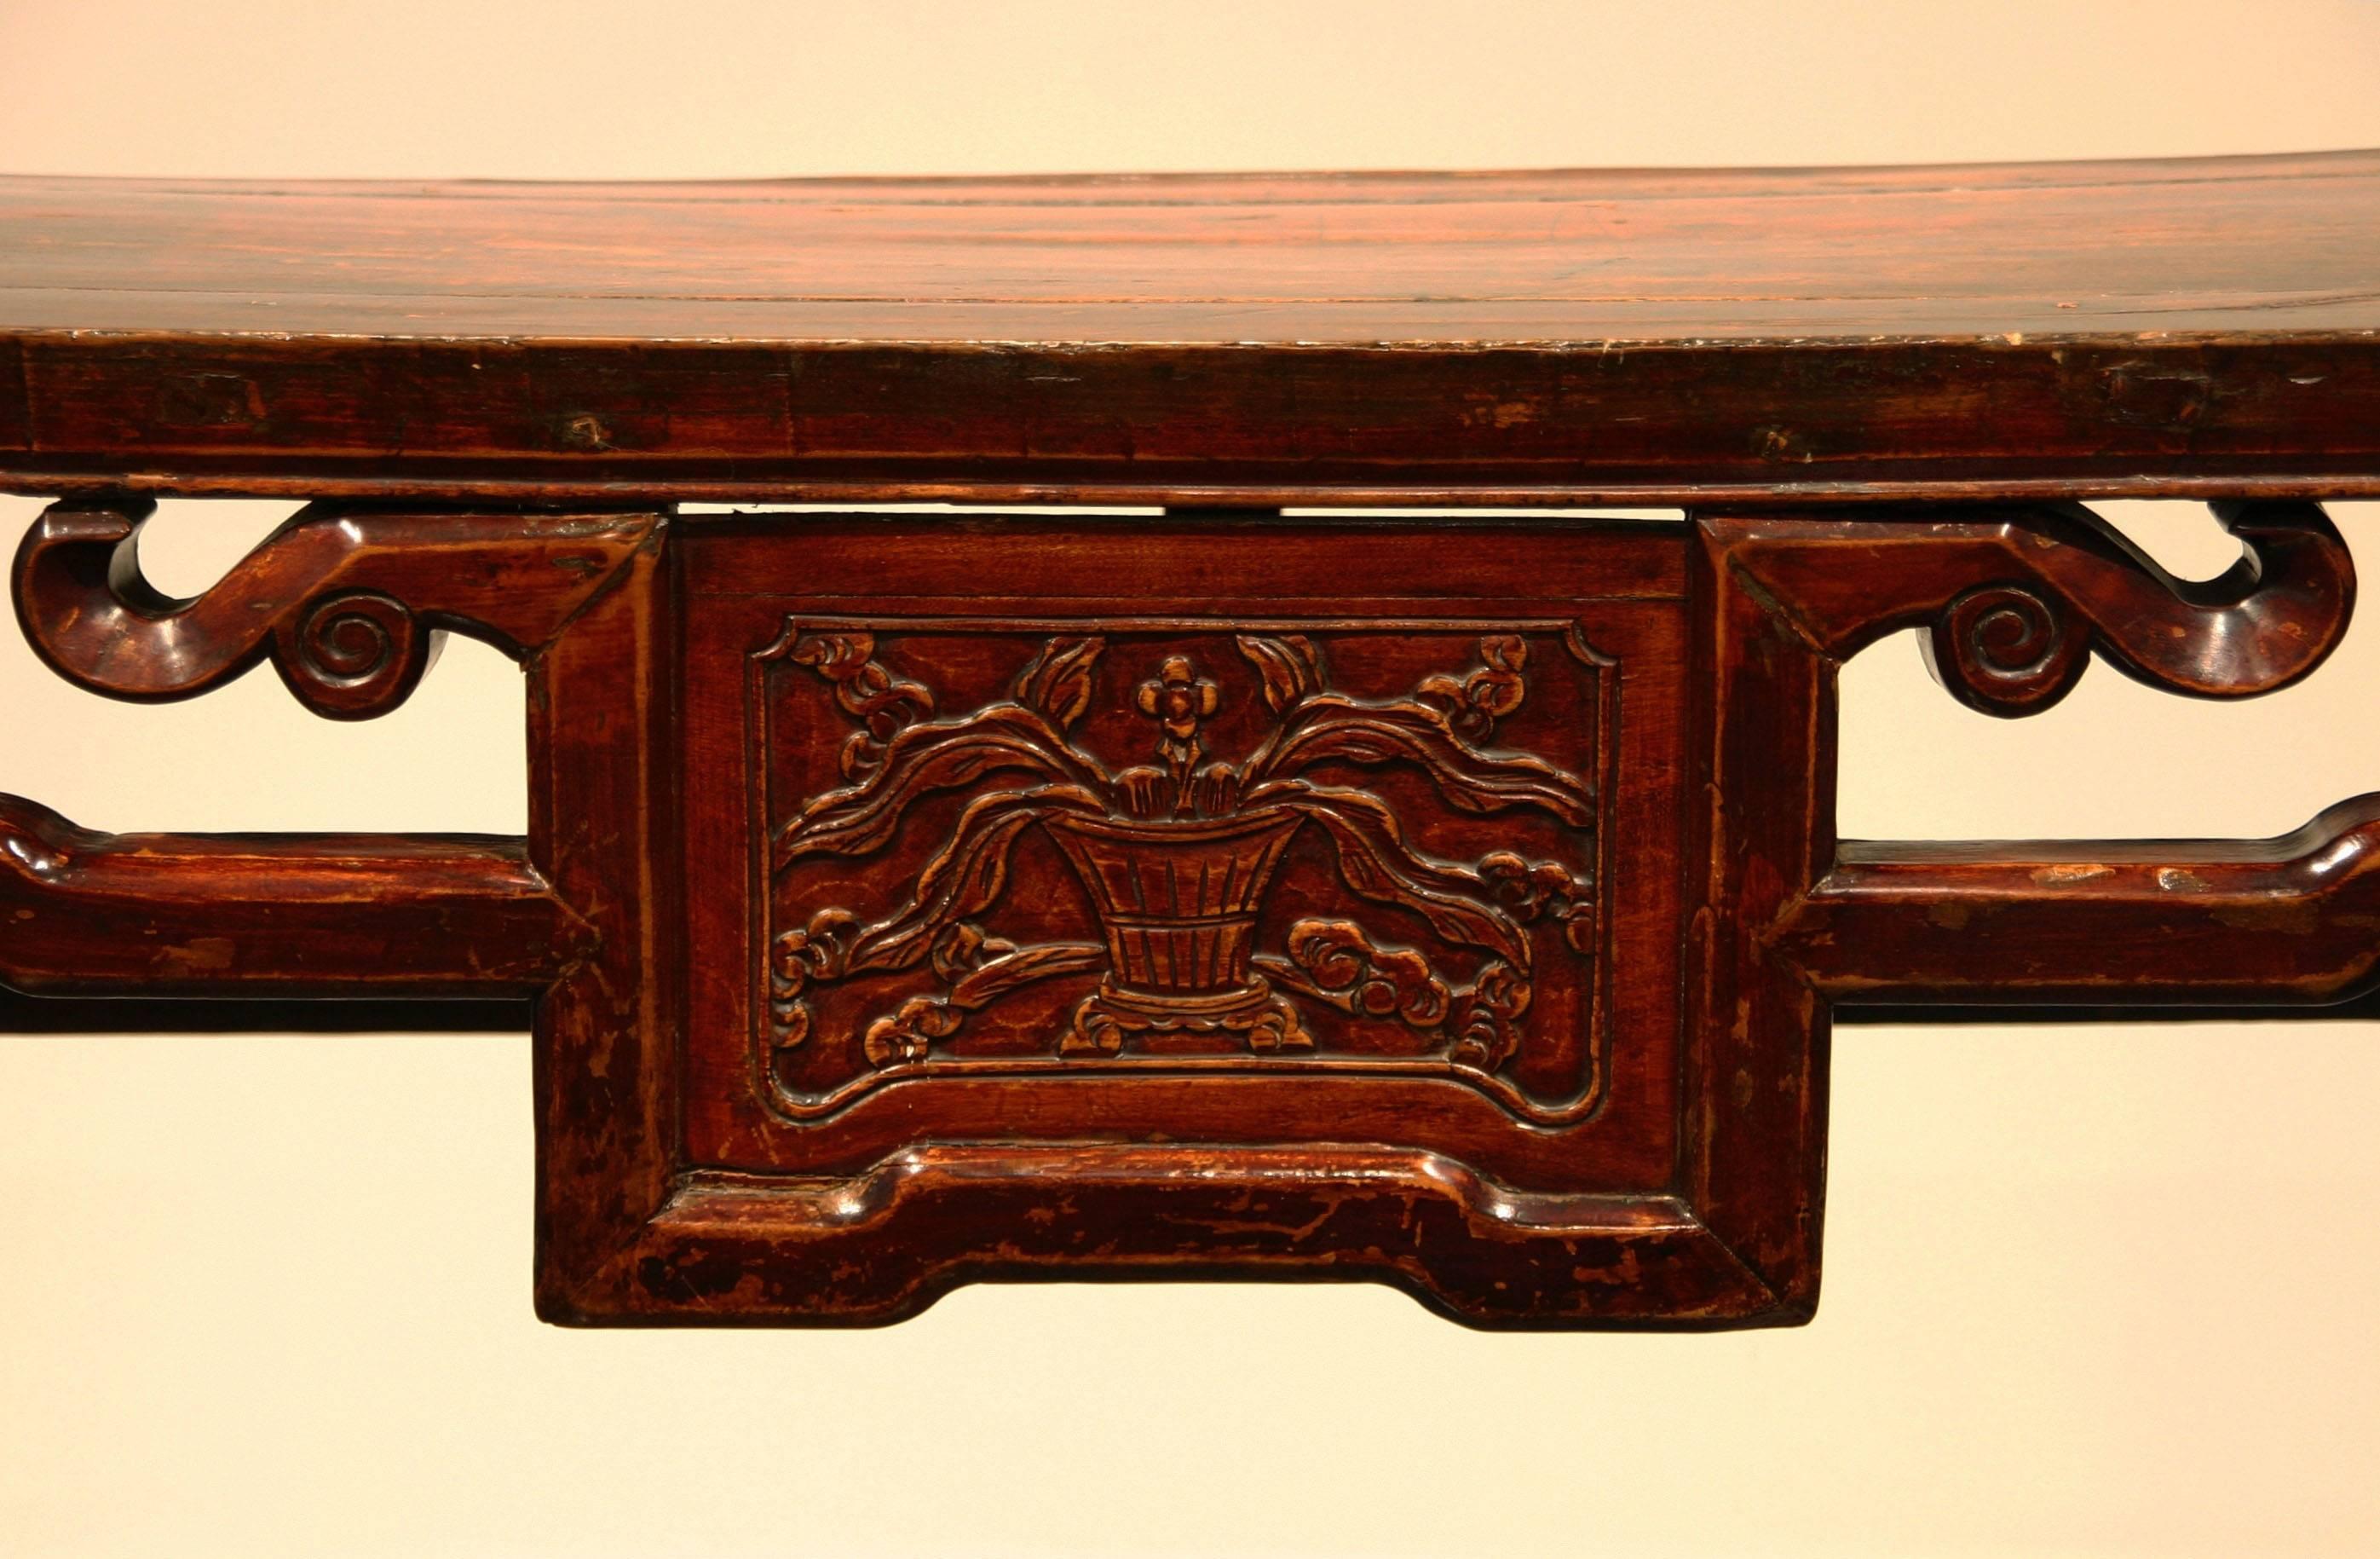 Chinese Export Chinese Alter Table Qing Dynasty